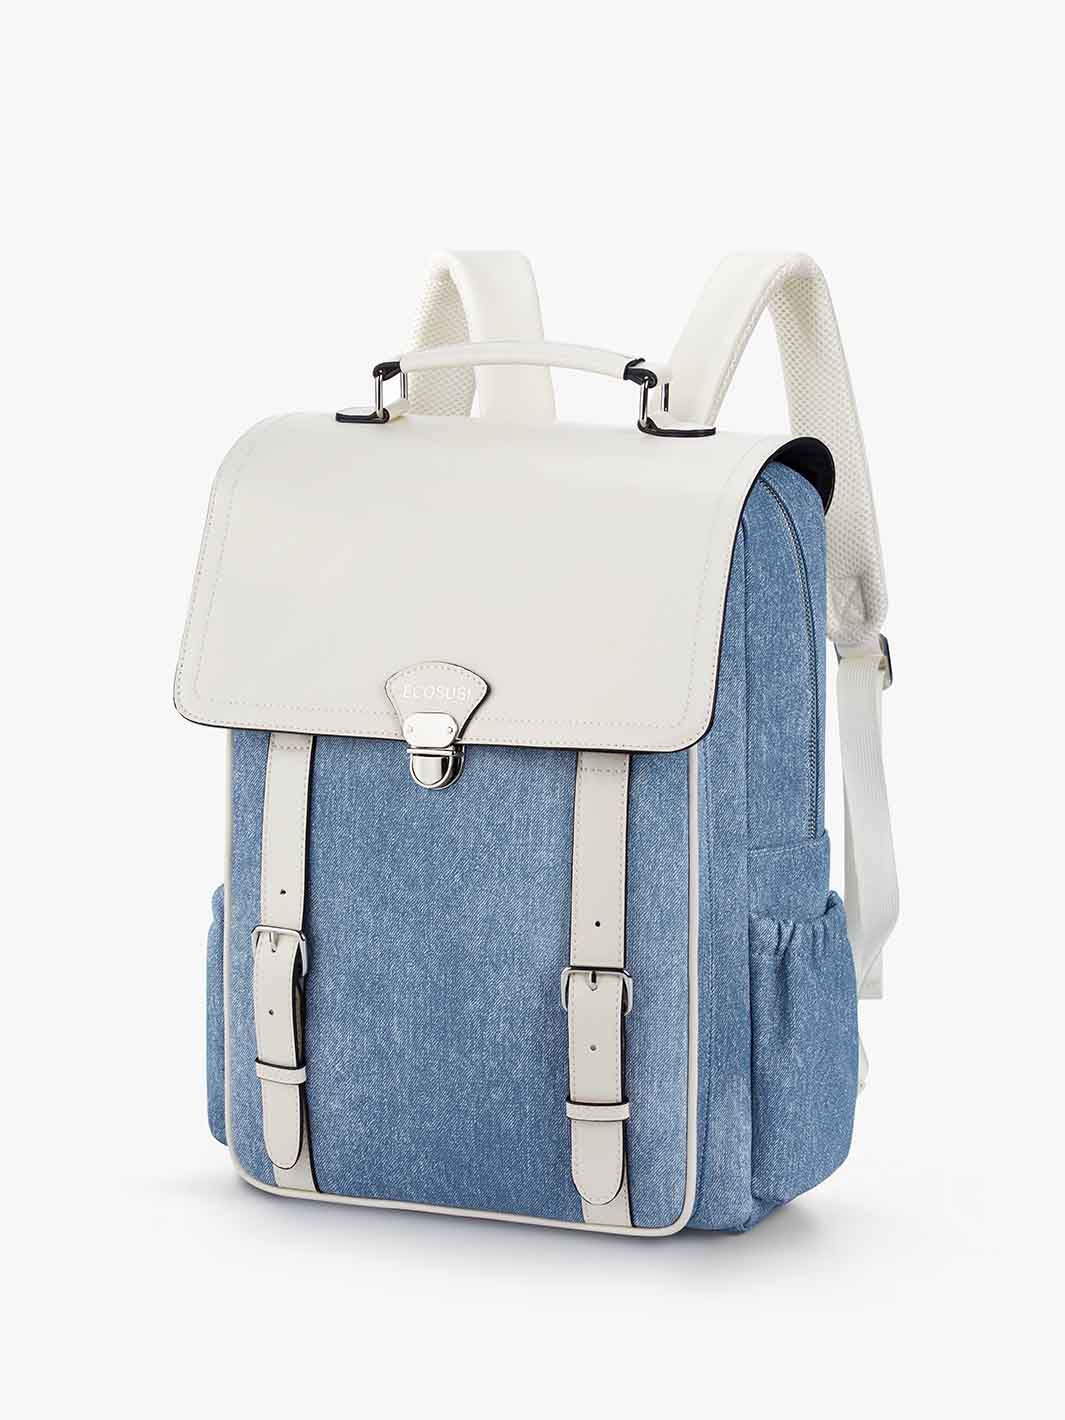 Lightweight Travel Backpack with Denim-Inspired PU Fabric